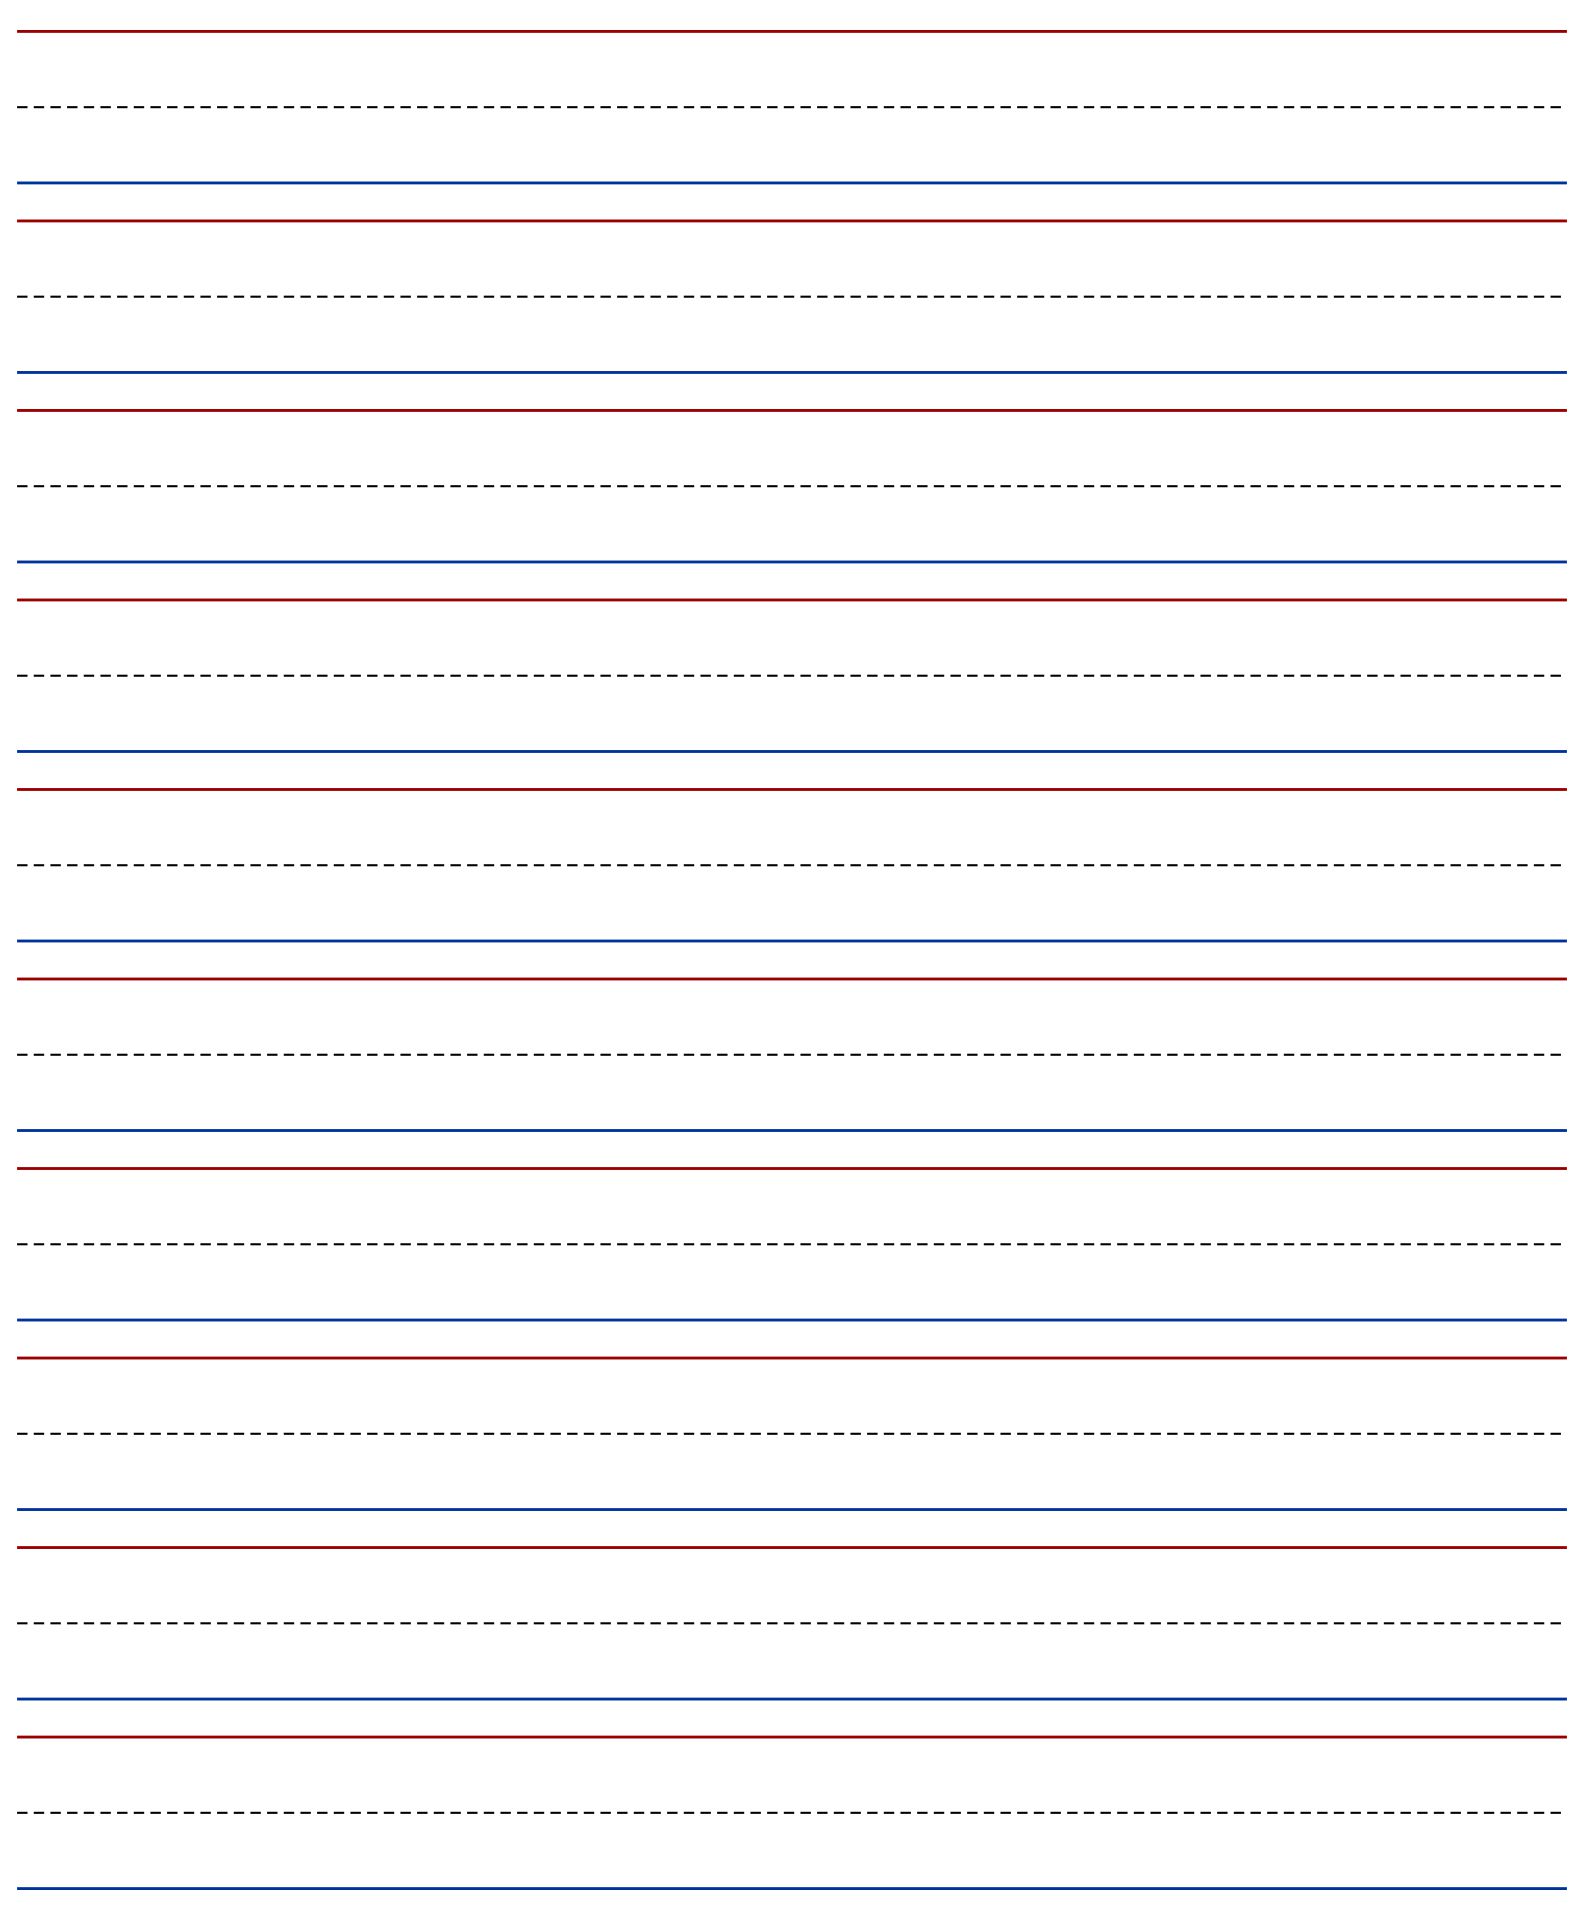 Printable Primary Writing Paper Template_85226